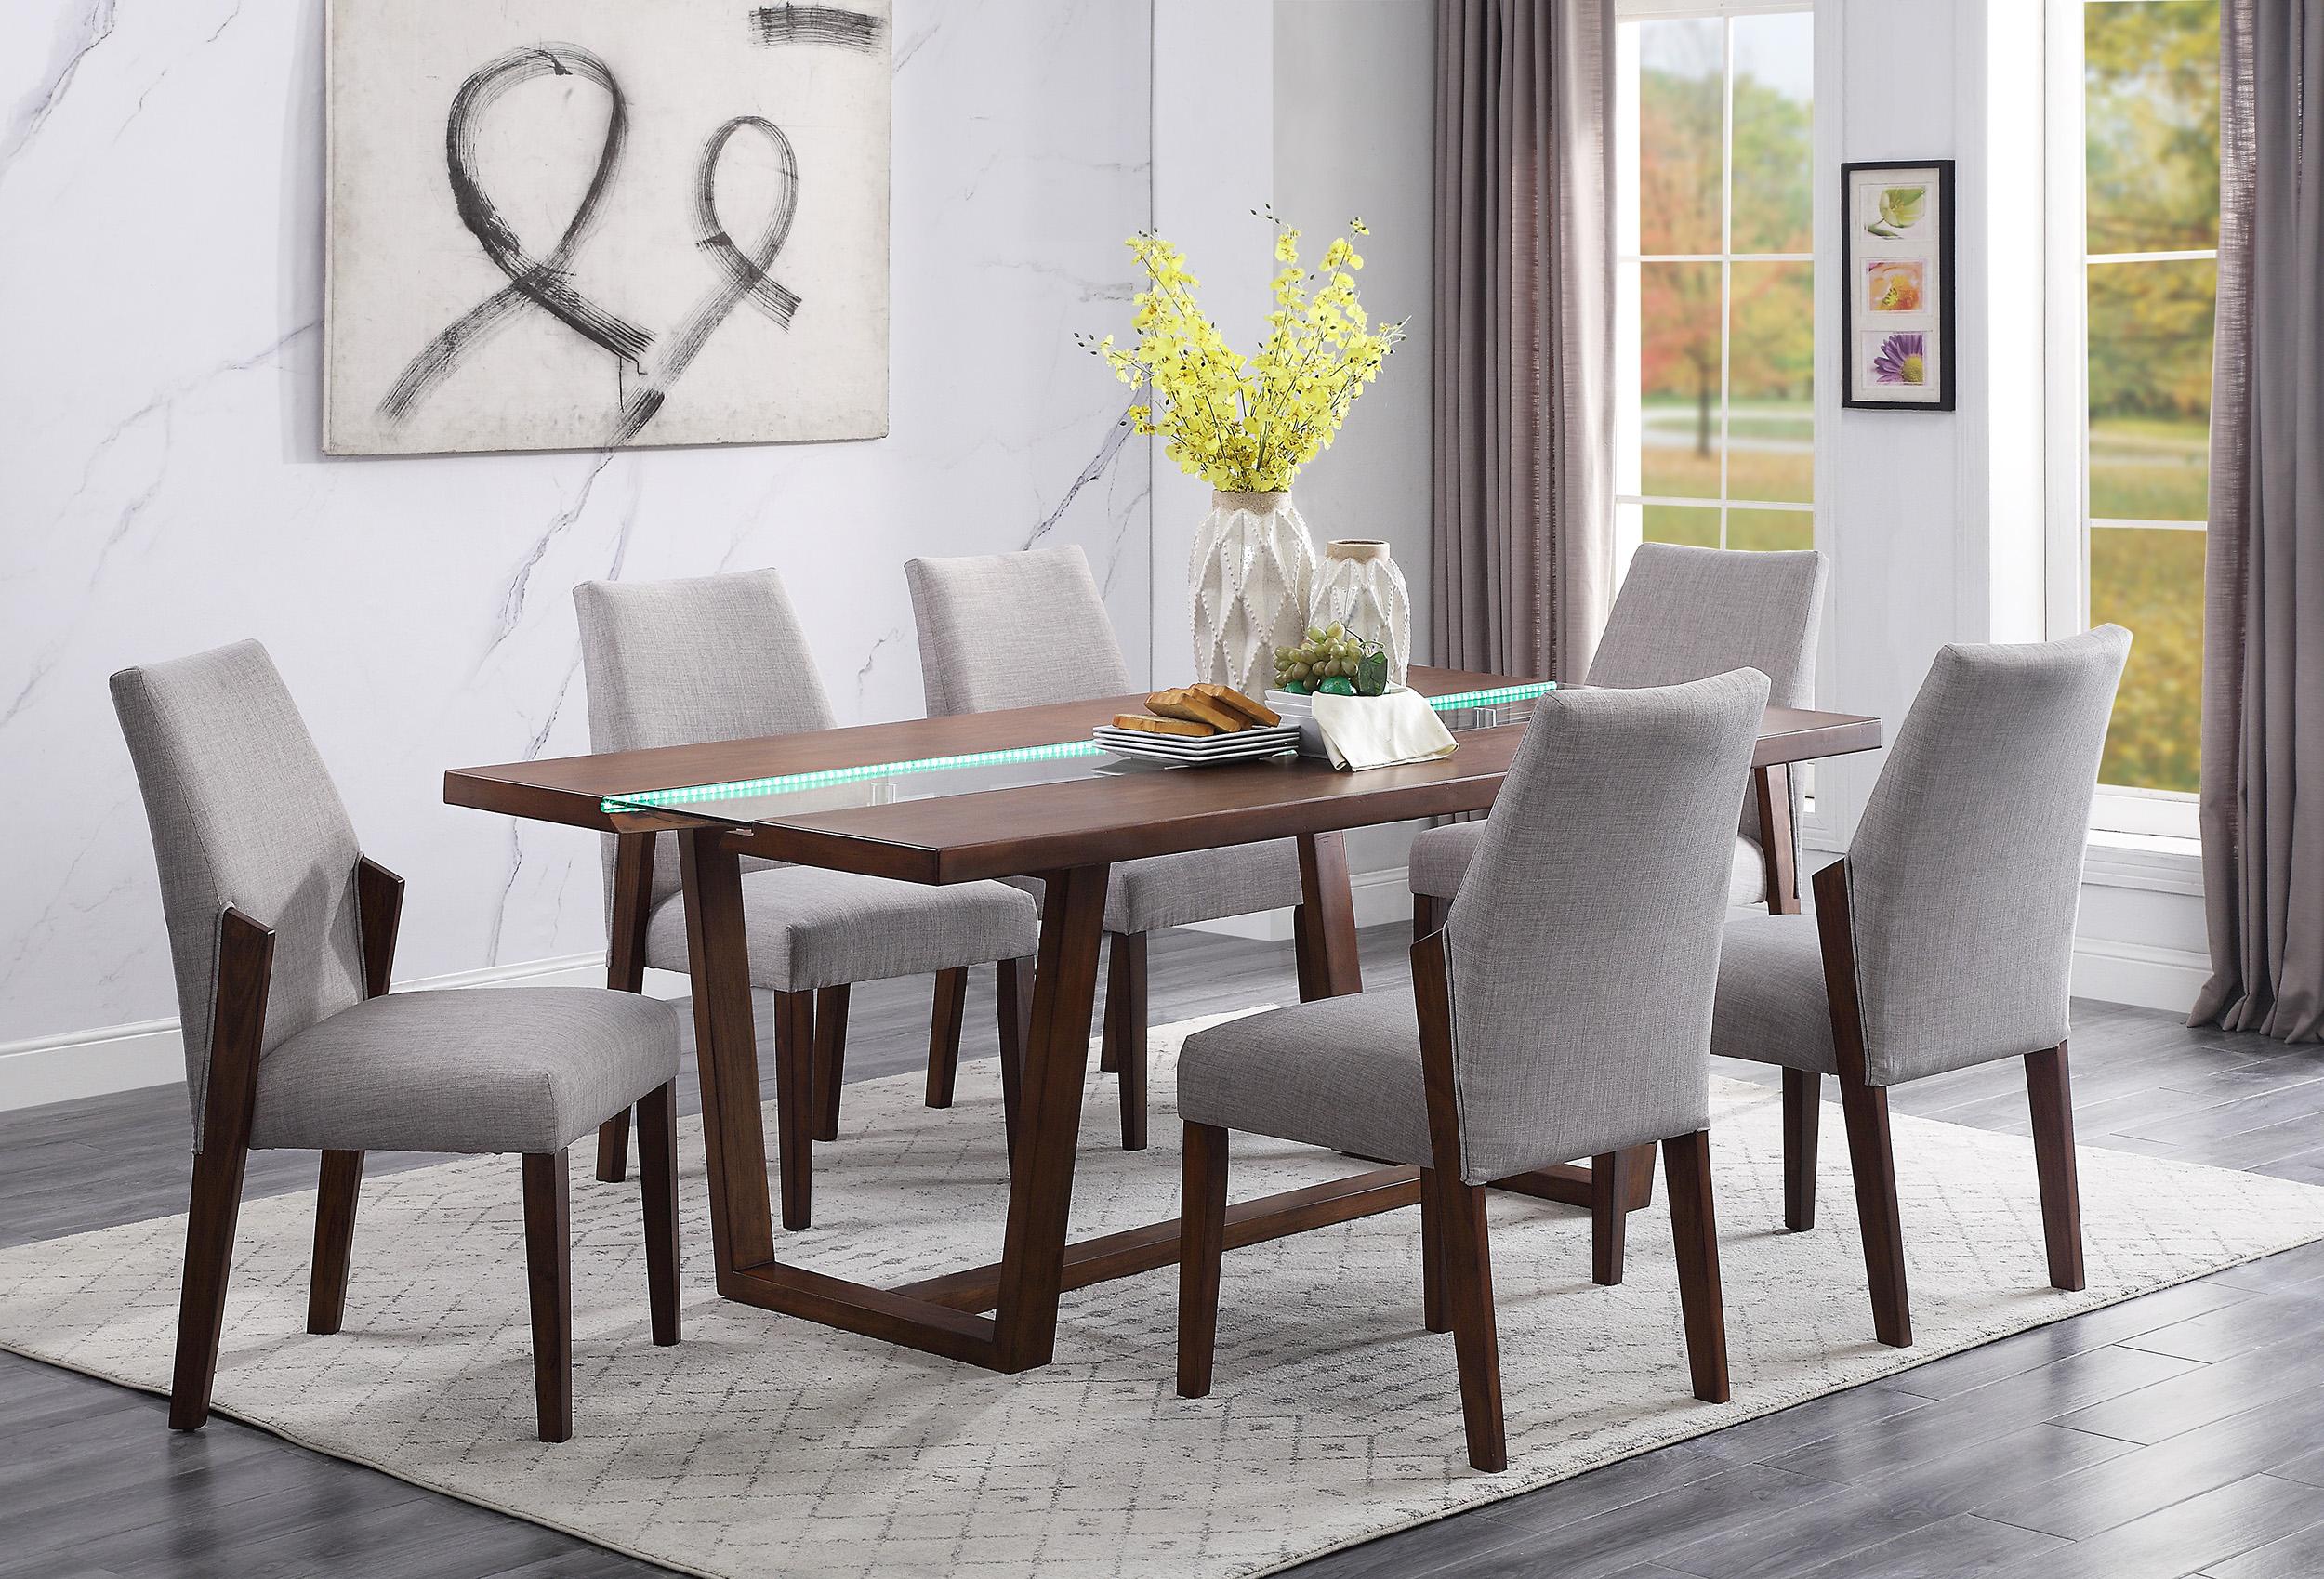 Contemporary, Modern, Urban Dining Table Set Benoit 72295-Set-7 in Gray, Brown Fabric